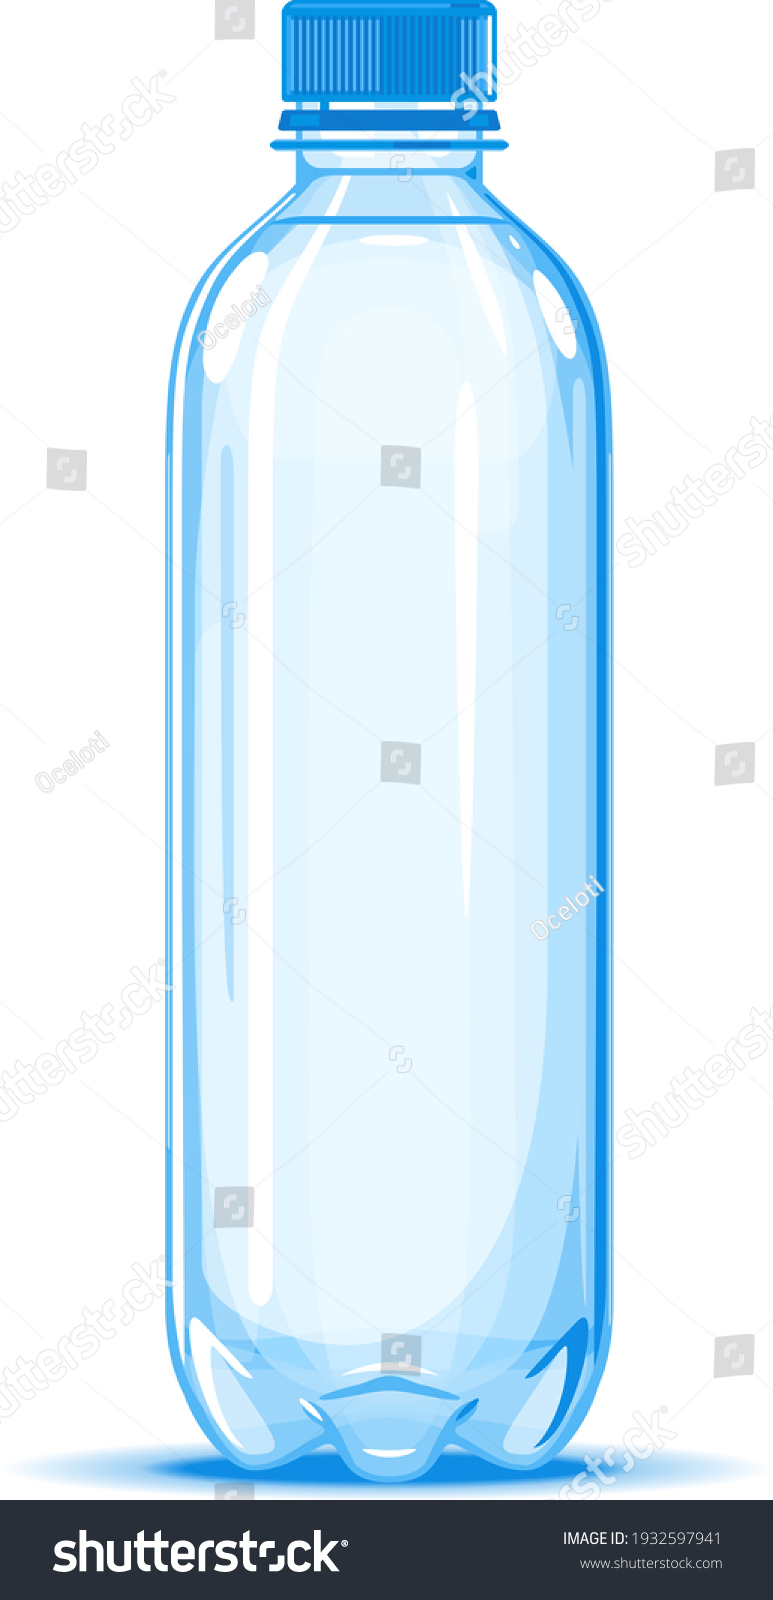 SVG of One small half liter plastic water bottle of drinking water quality illustration on white background, water delivery service of fresh purified water isolated illustration, plastic bottle on side view svg